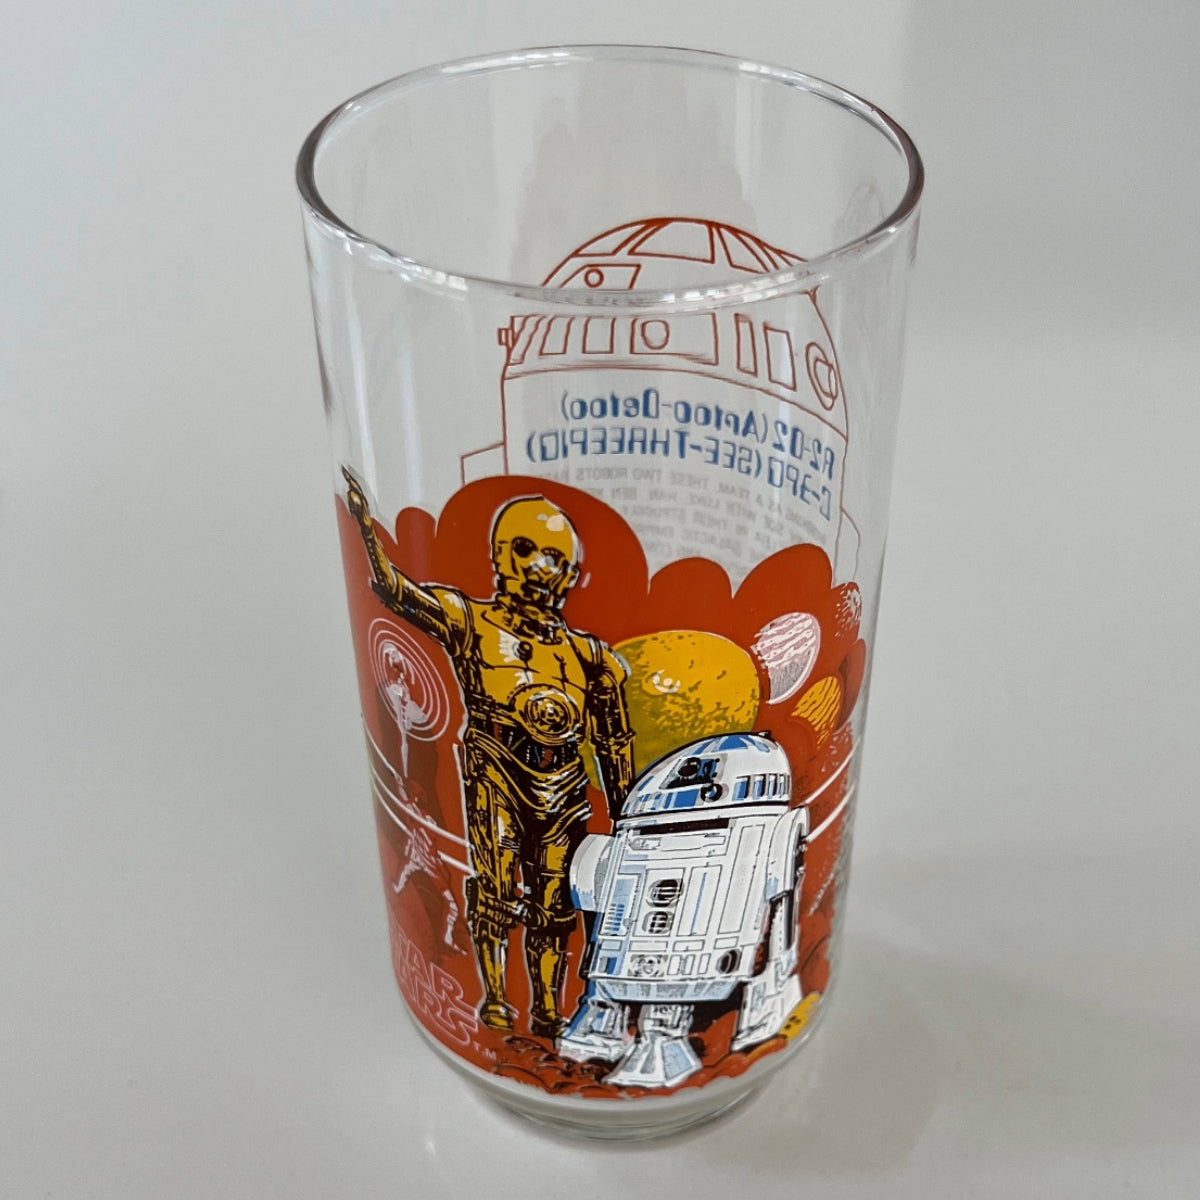 Vintage 1977 Burger King Star Wars R2-D2 C-3P0 Collectible Drinking Glass